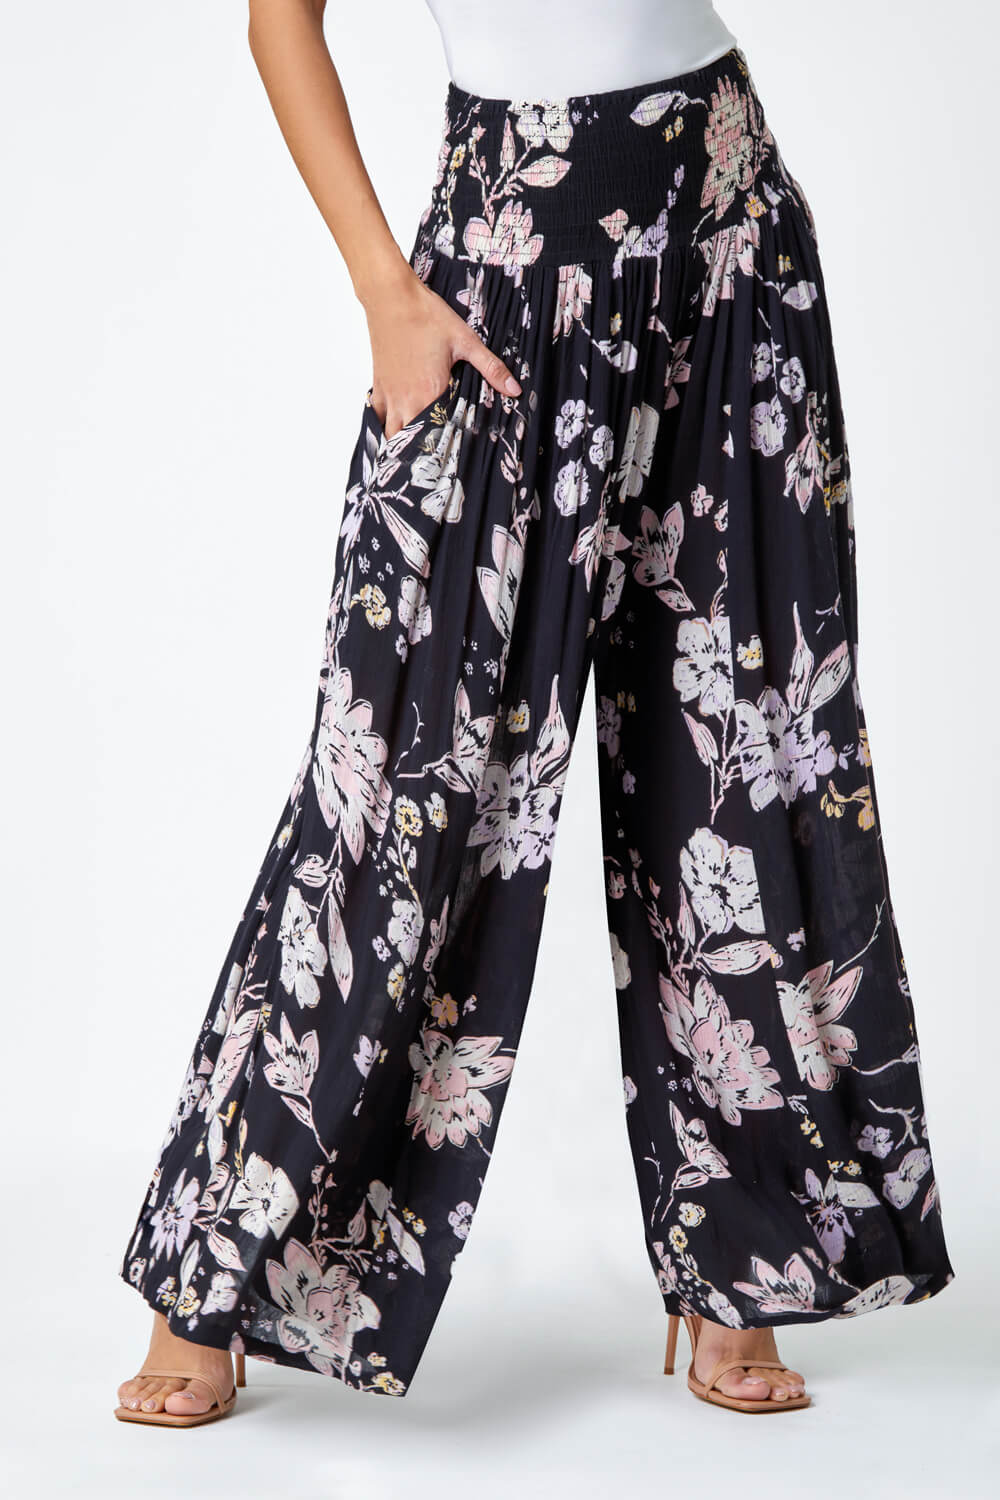 Black Floral Wide Leg Palazzo Trousers, Image 4 of 5